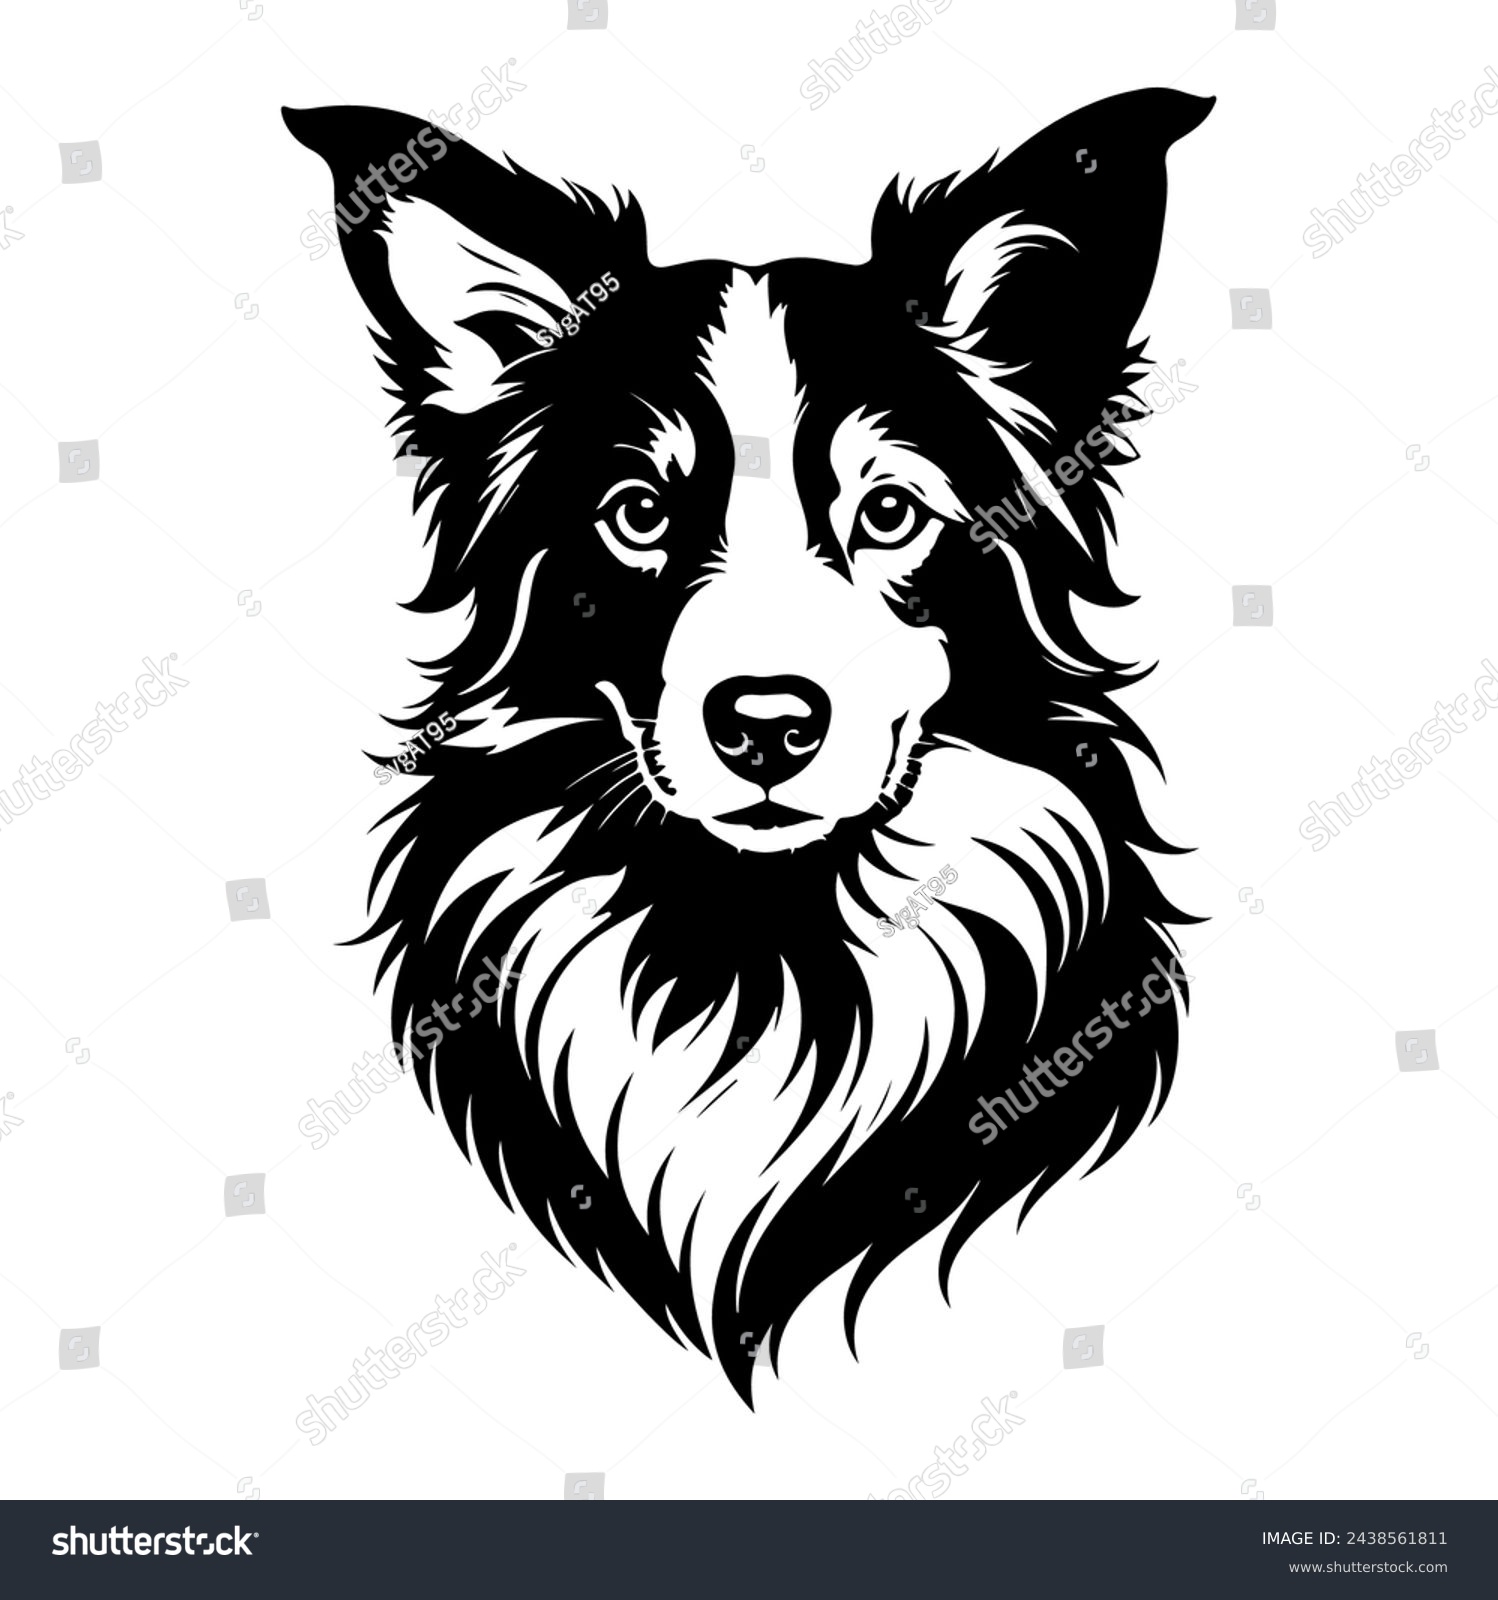 SVG of Portrait of a Border Collie Dog Vector isolated on white background, Dog Silhouettes. svg